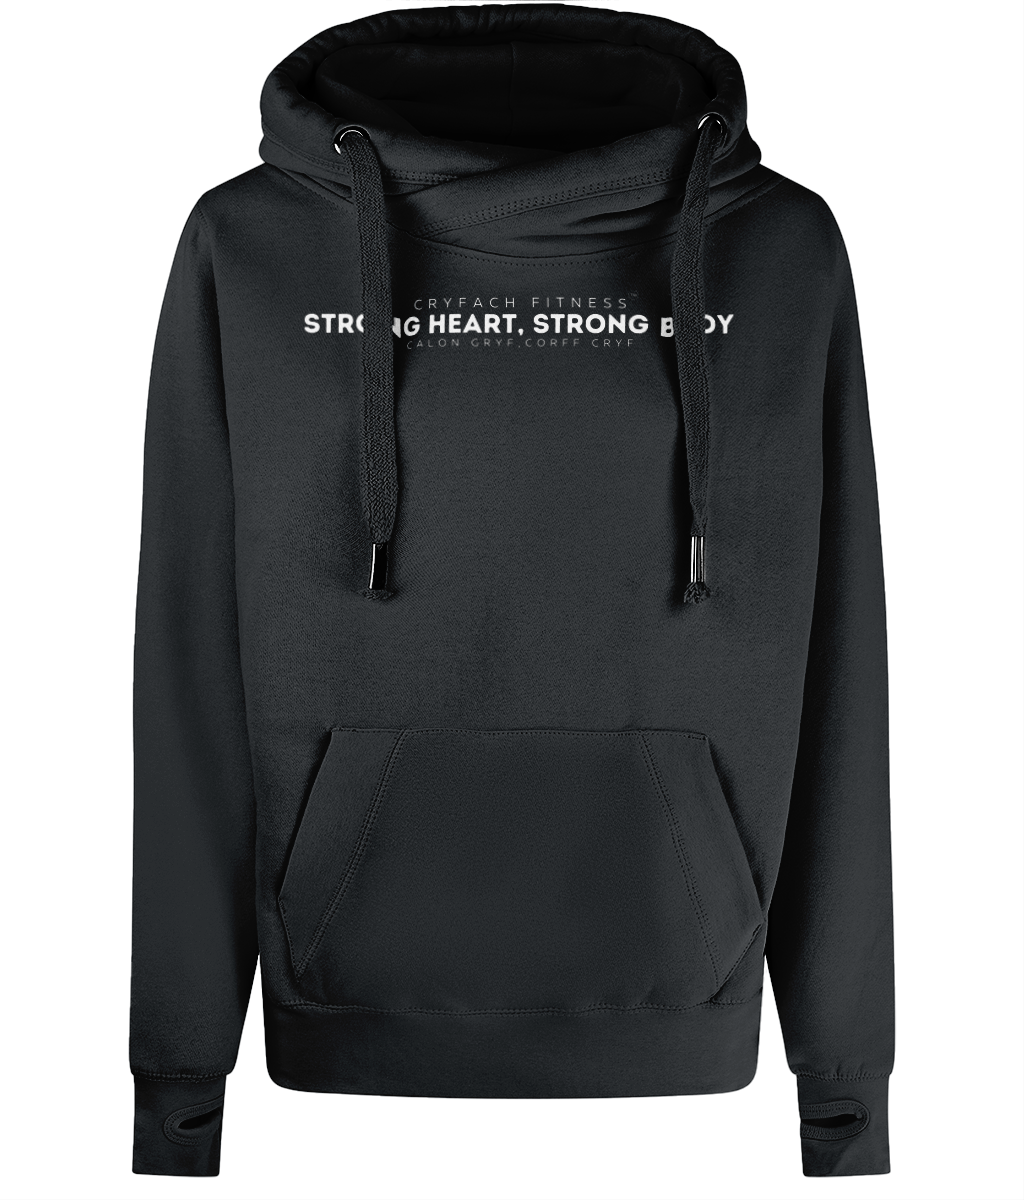 STRING HEART, STRONG BODY HEAVYWEIGHT HOODIE